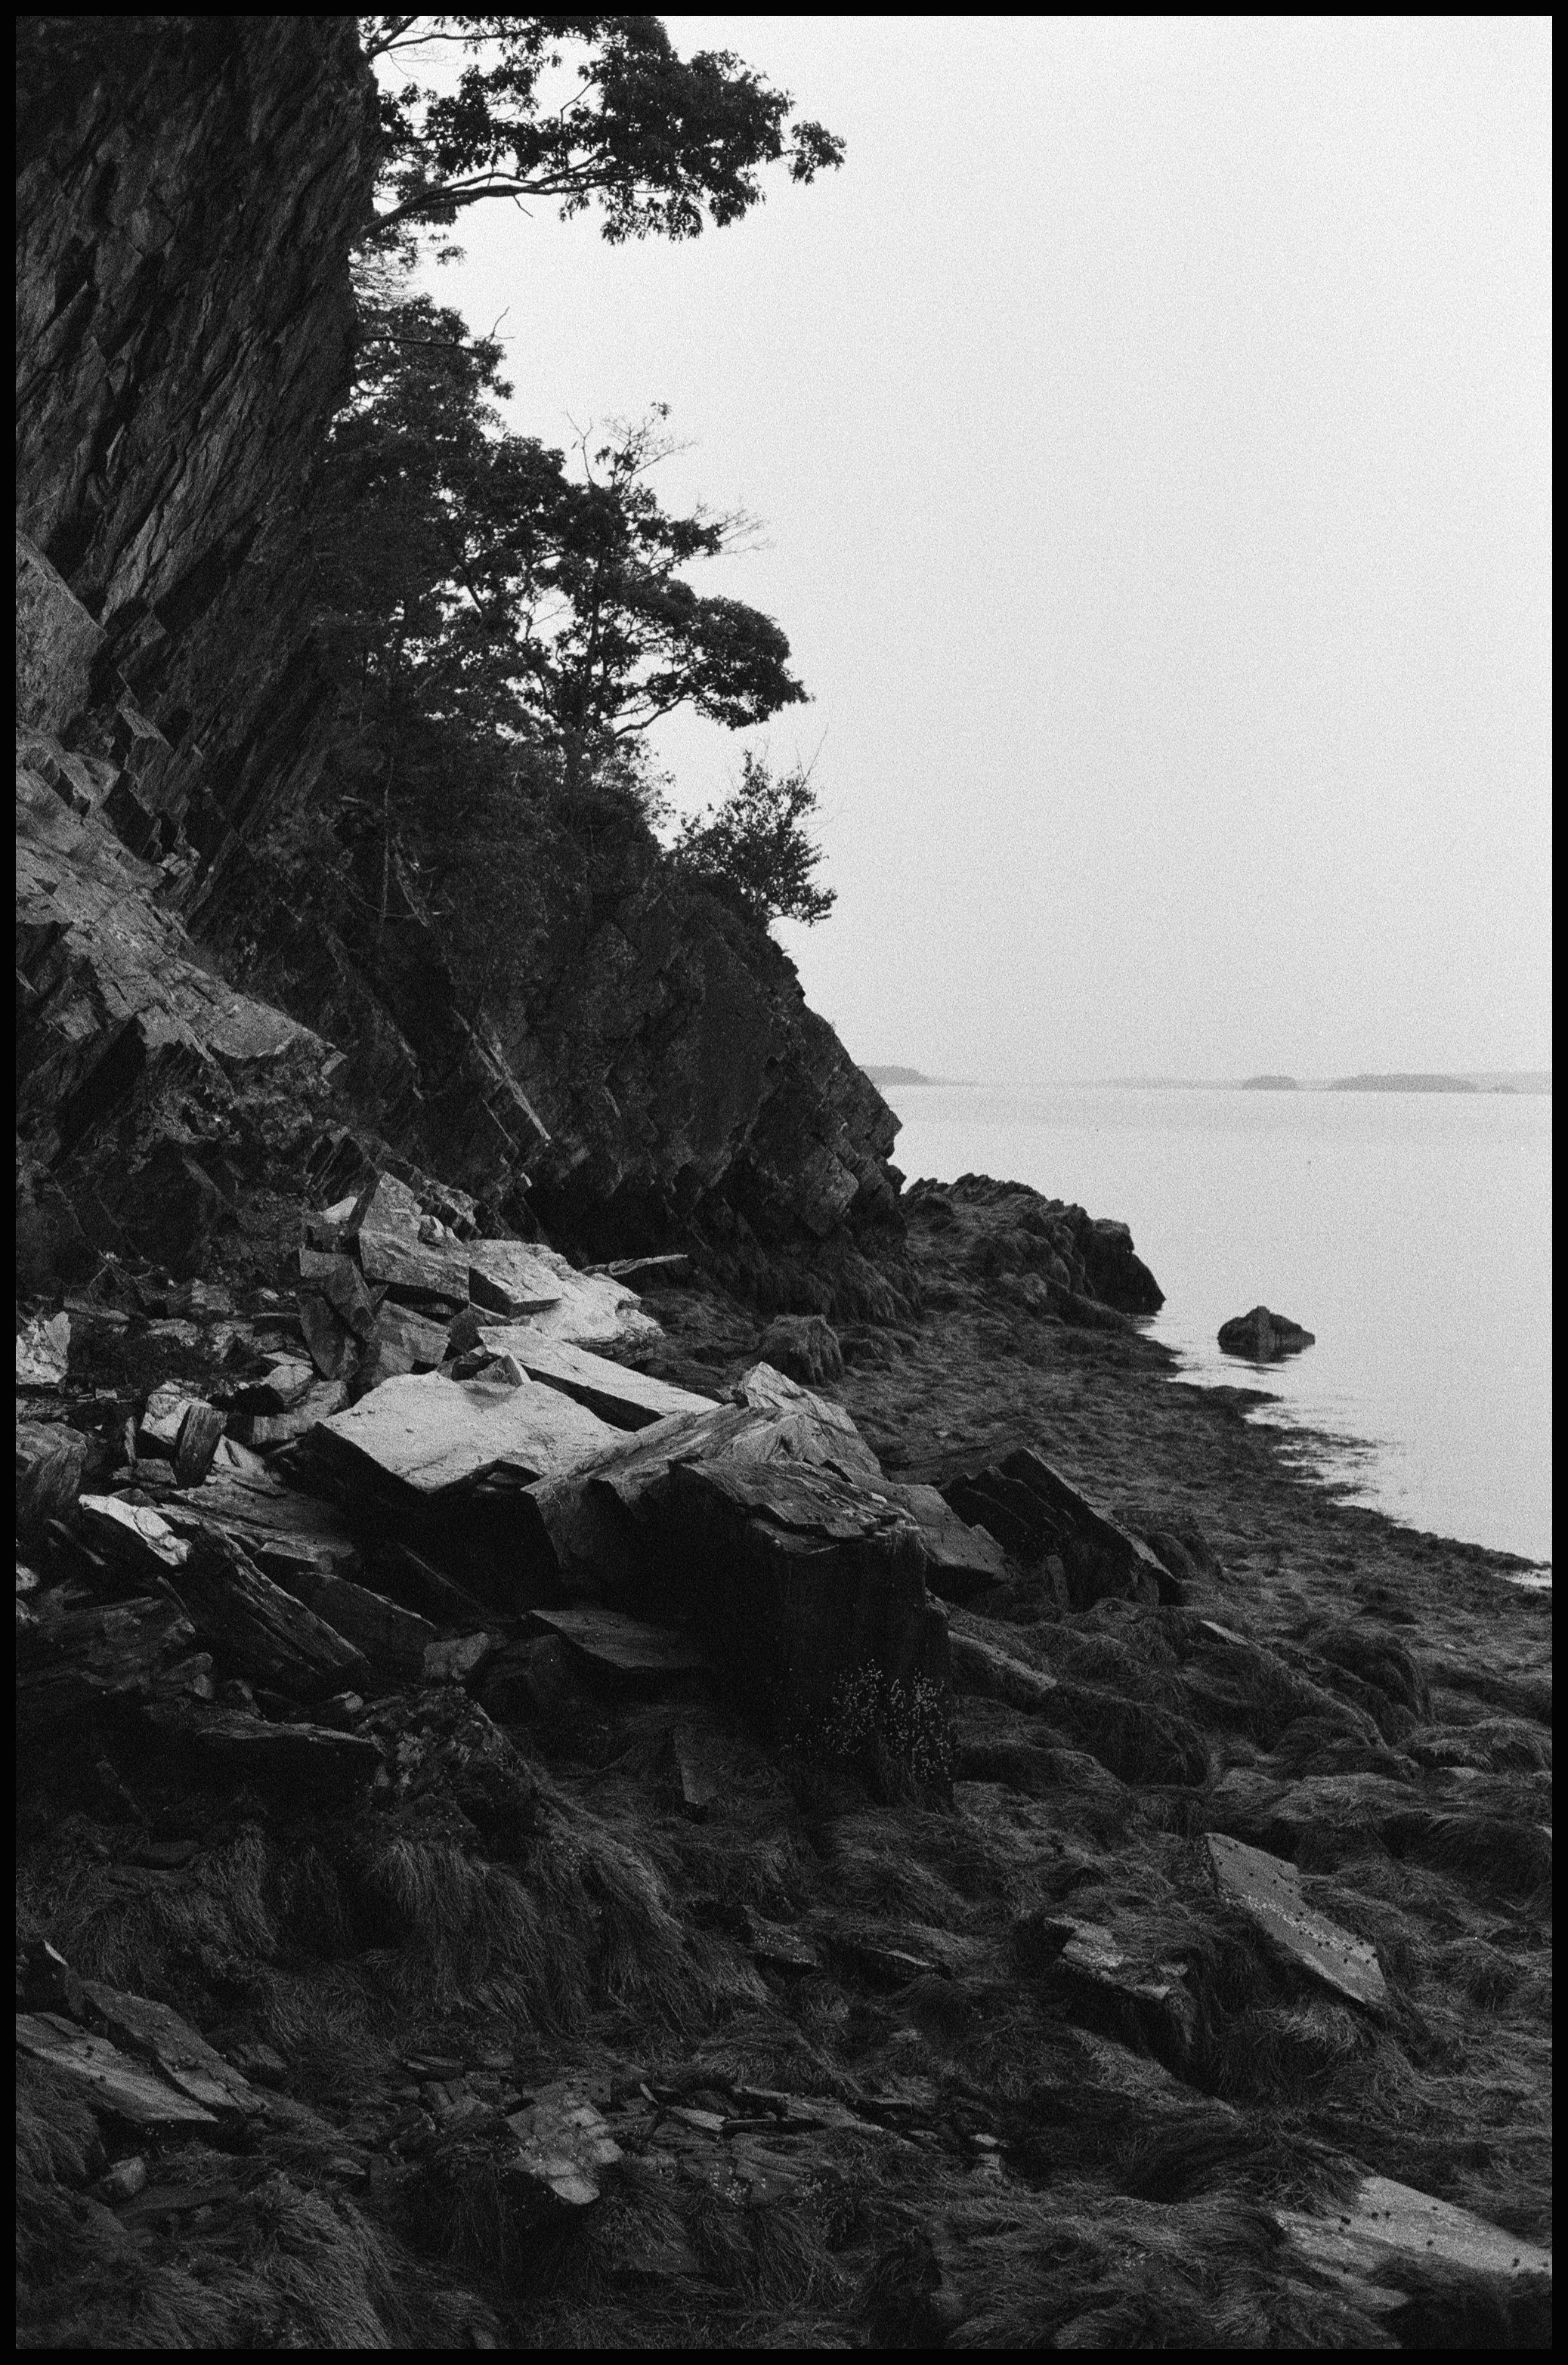 Moments in Maine on film